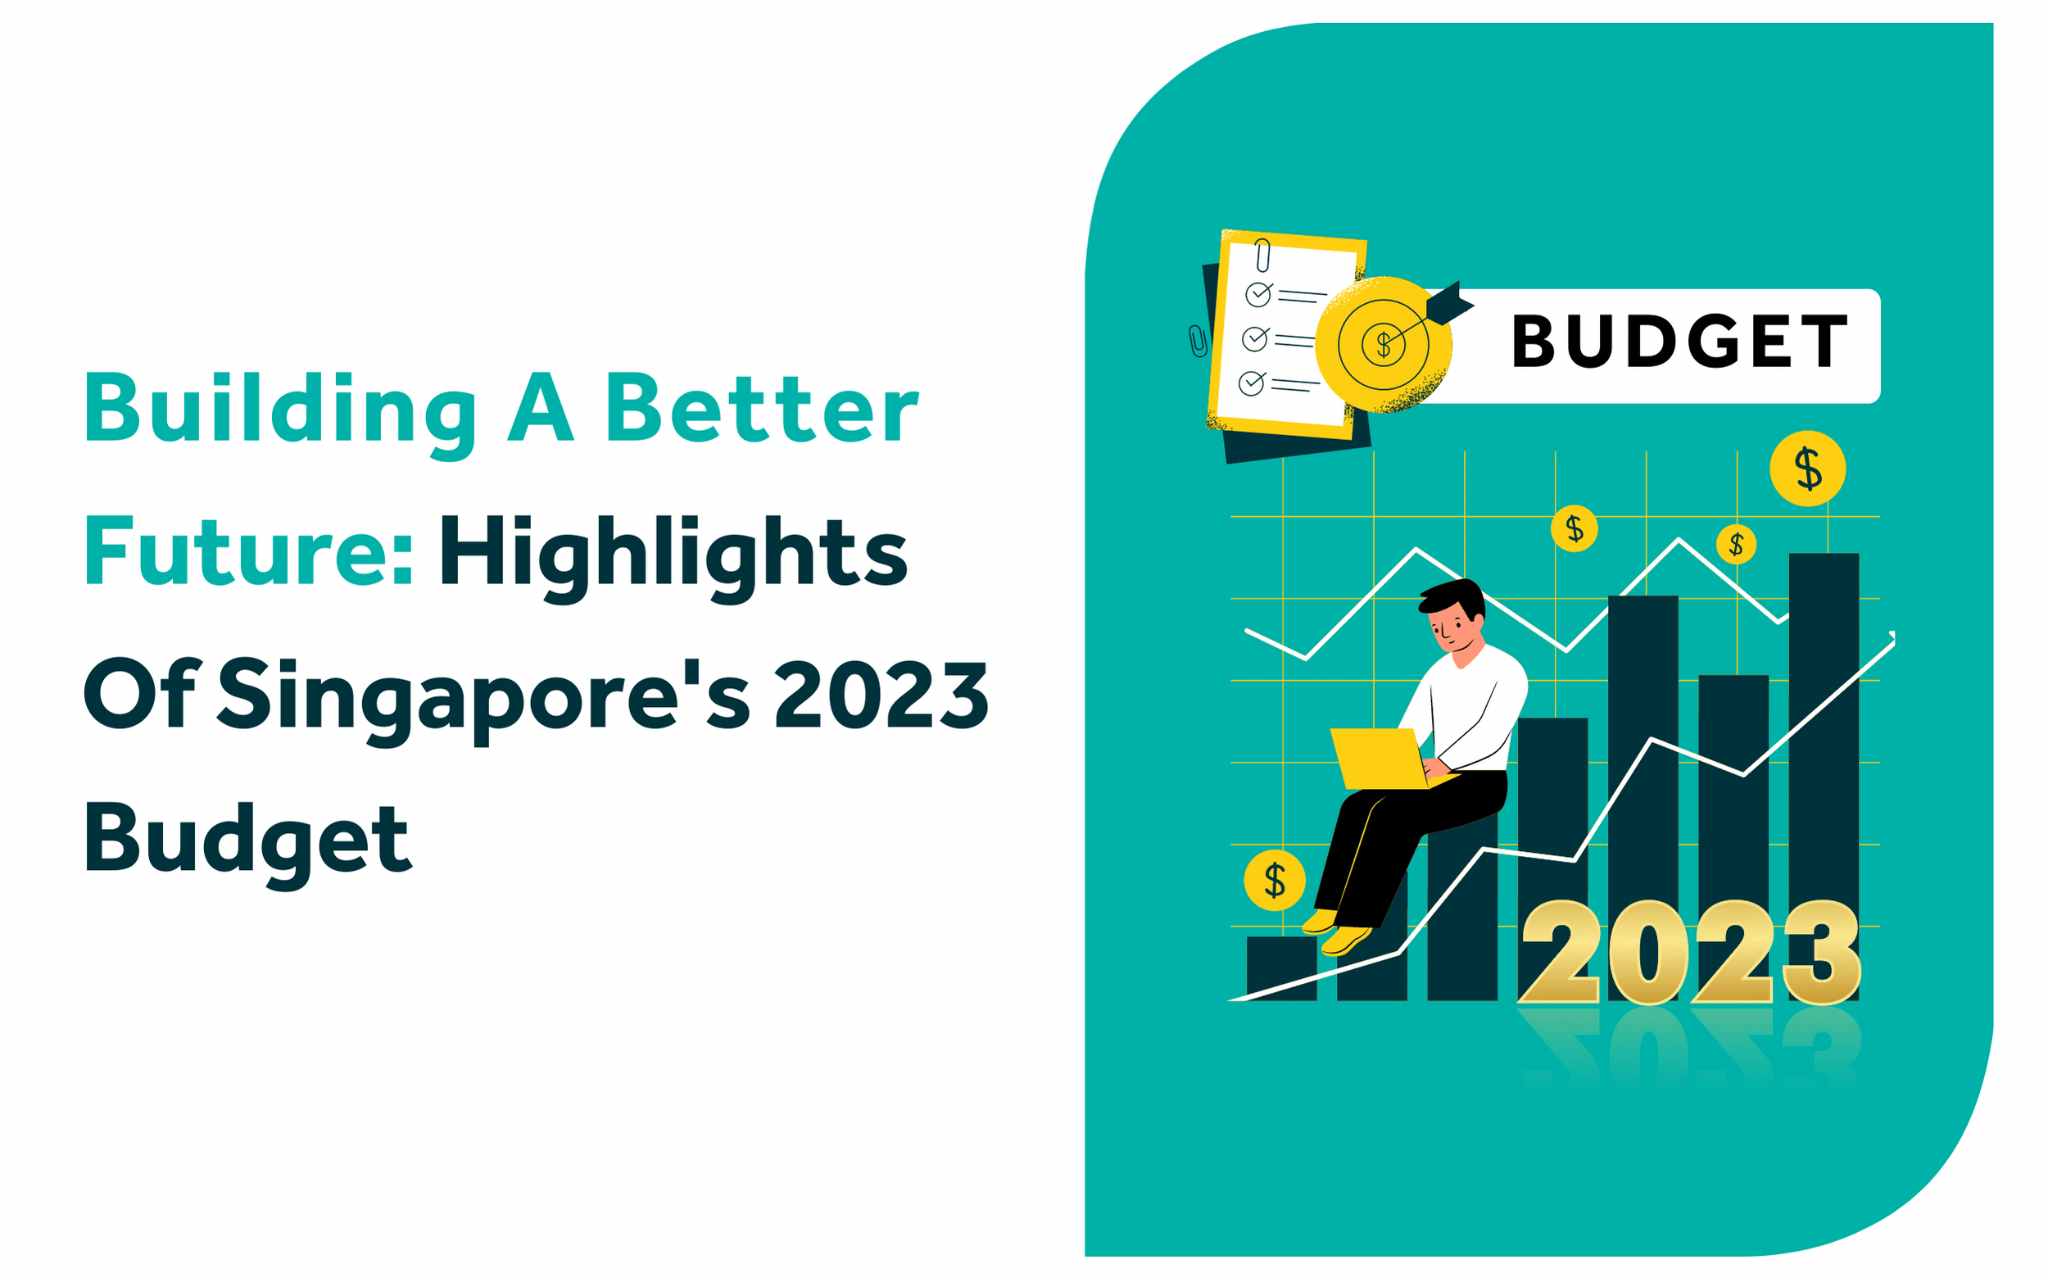 Highlights of Singapore's 2023 Budget